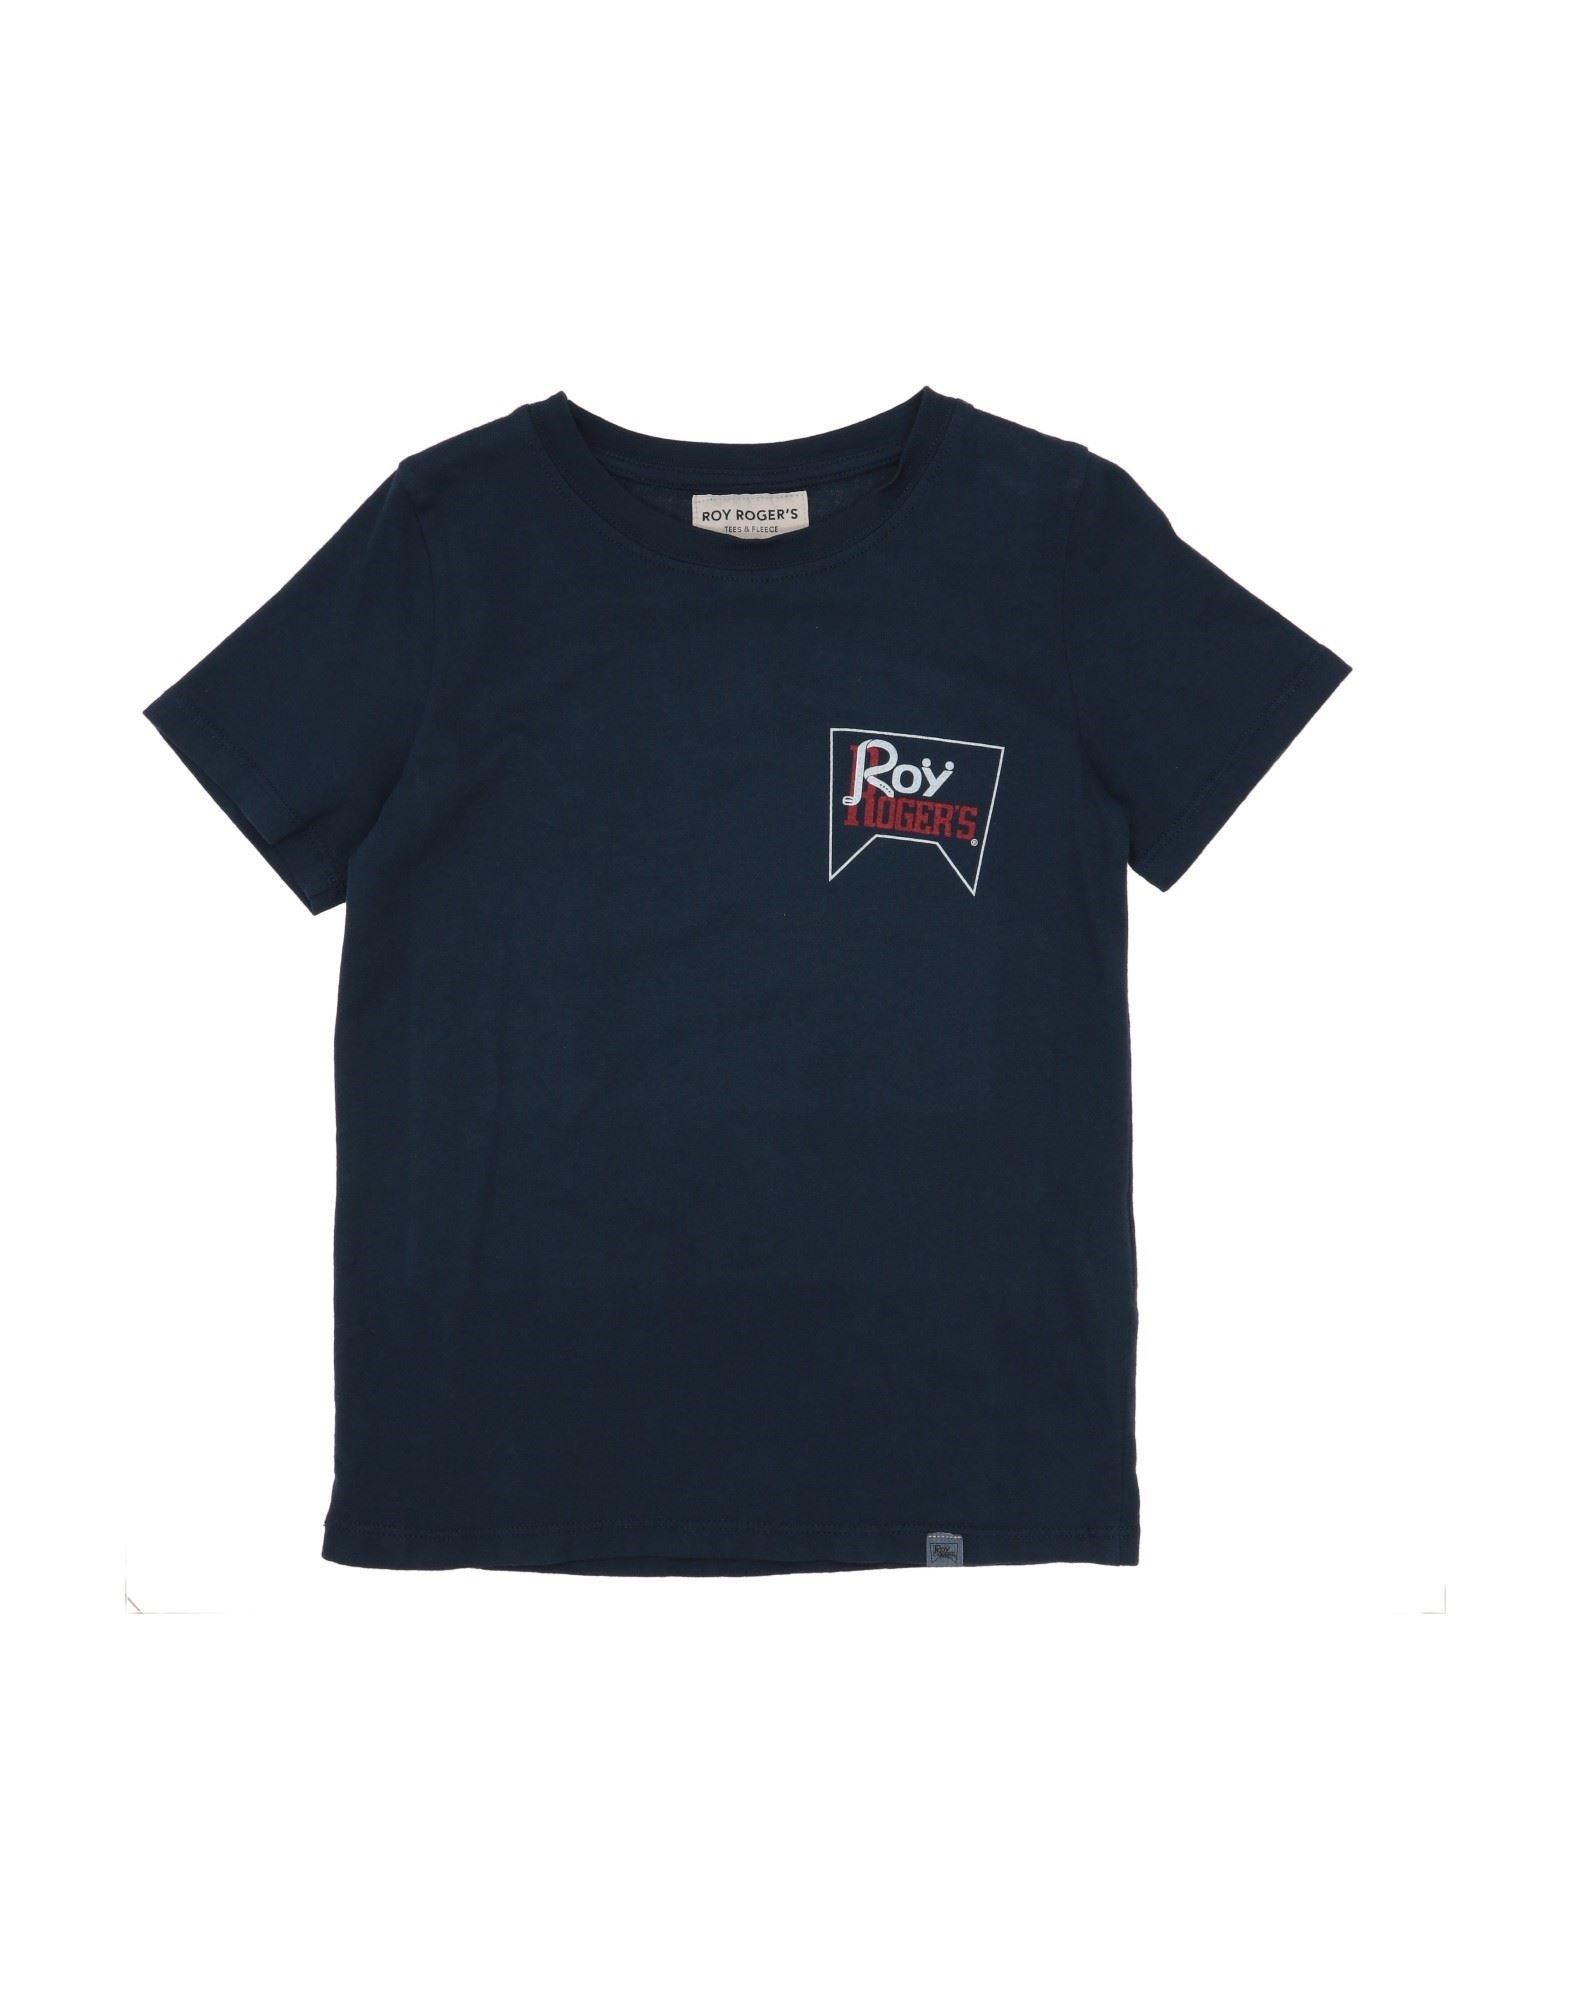 Roy Rogers Kids' Roÿ Roger's Toddler Boy T-shirt Midnight Blue Size 4 Cotton